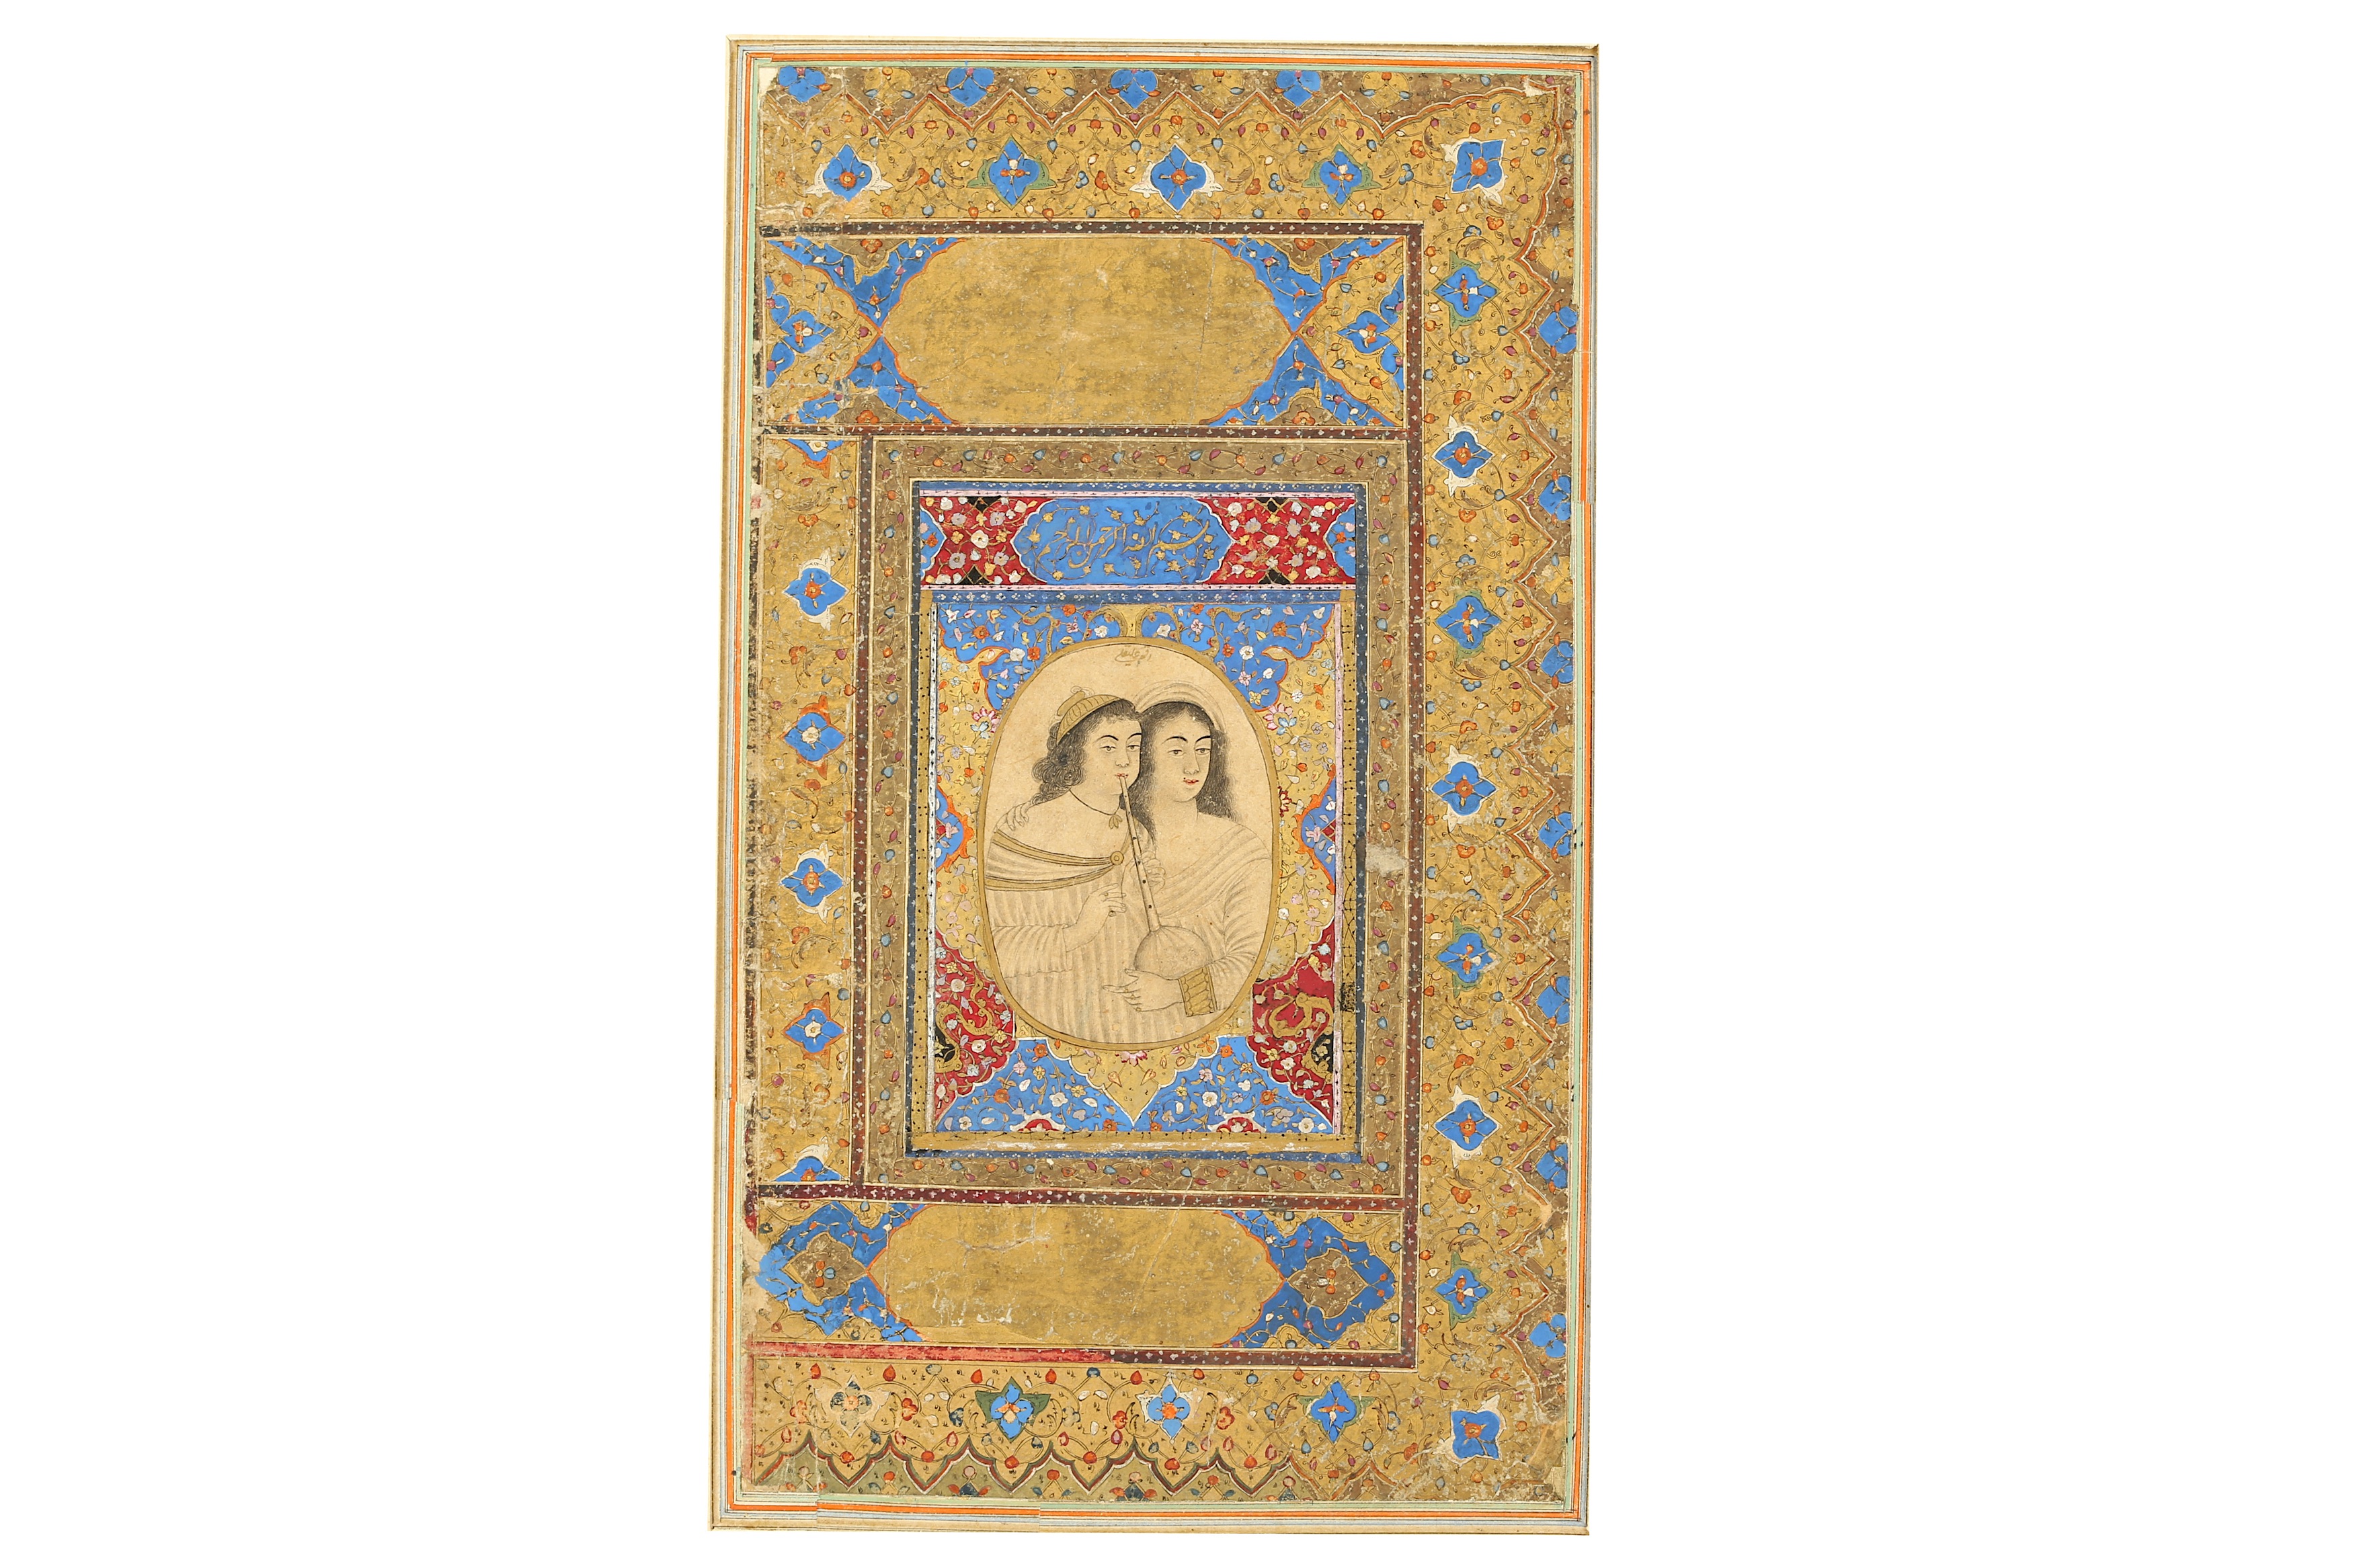 *A QAJAR MURAQQA' PAGE: TWO LADIES WITH A BAGPIPE